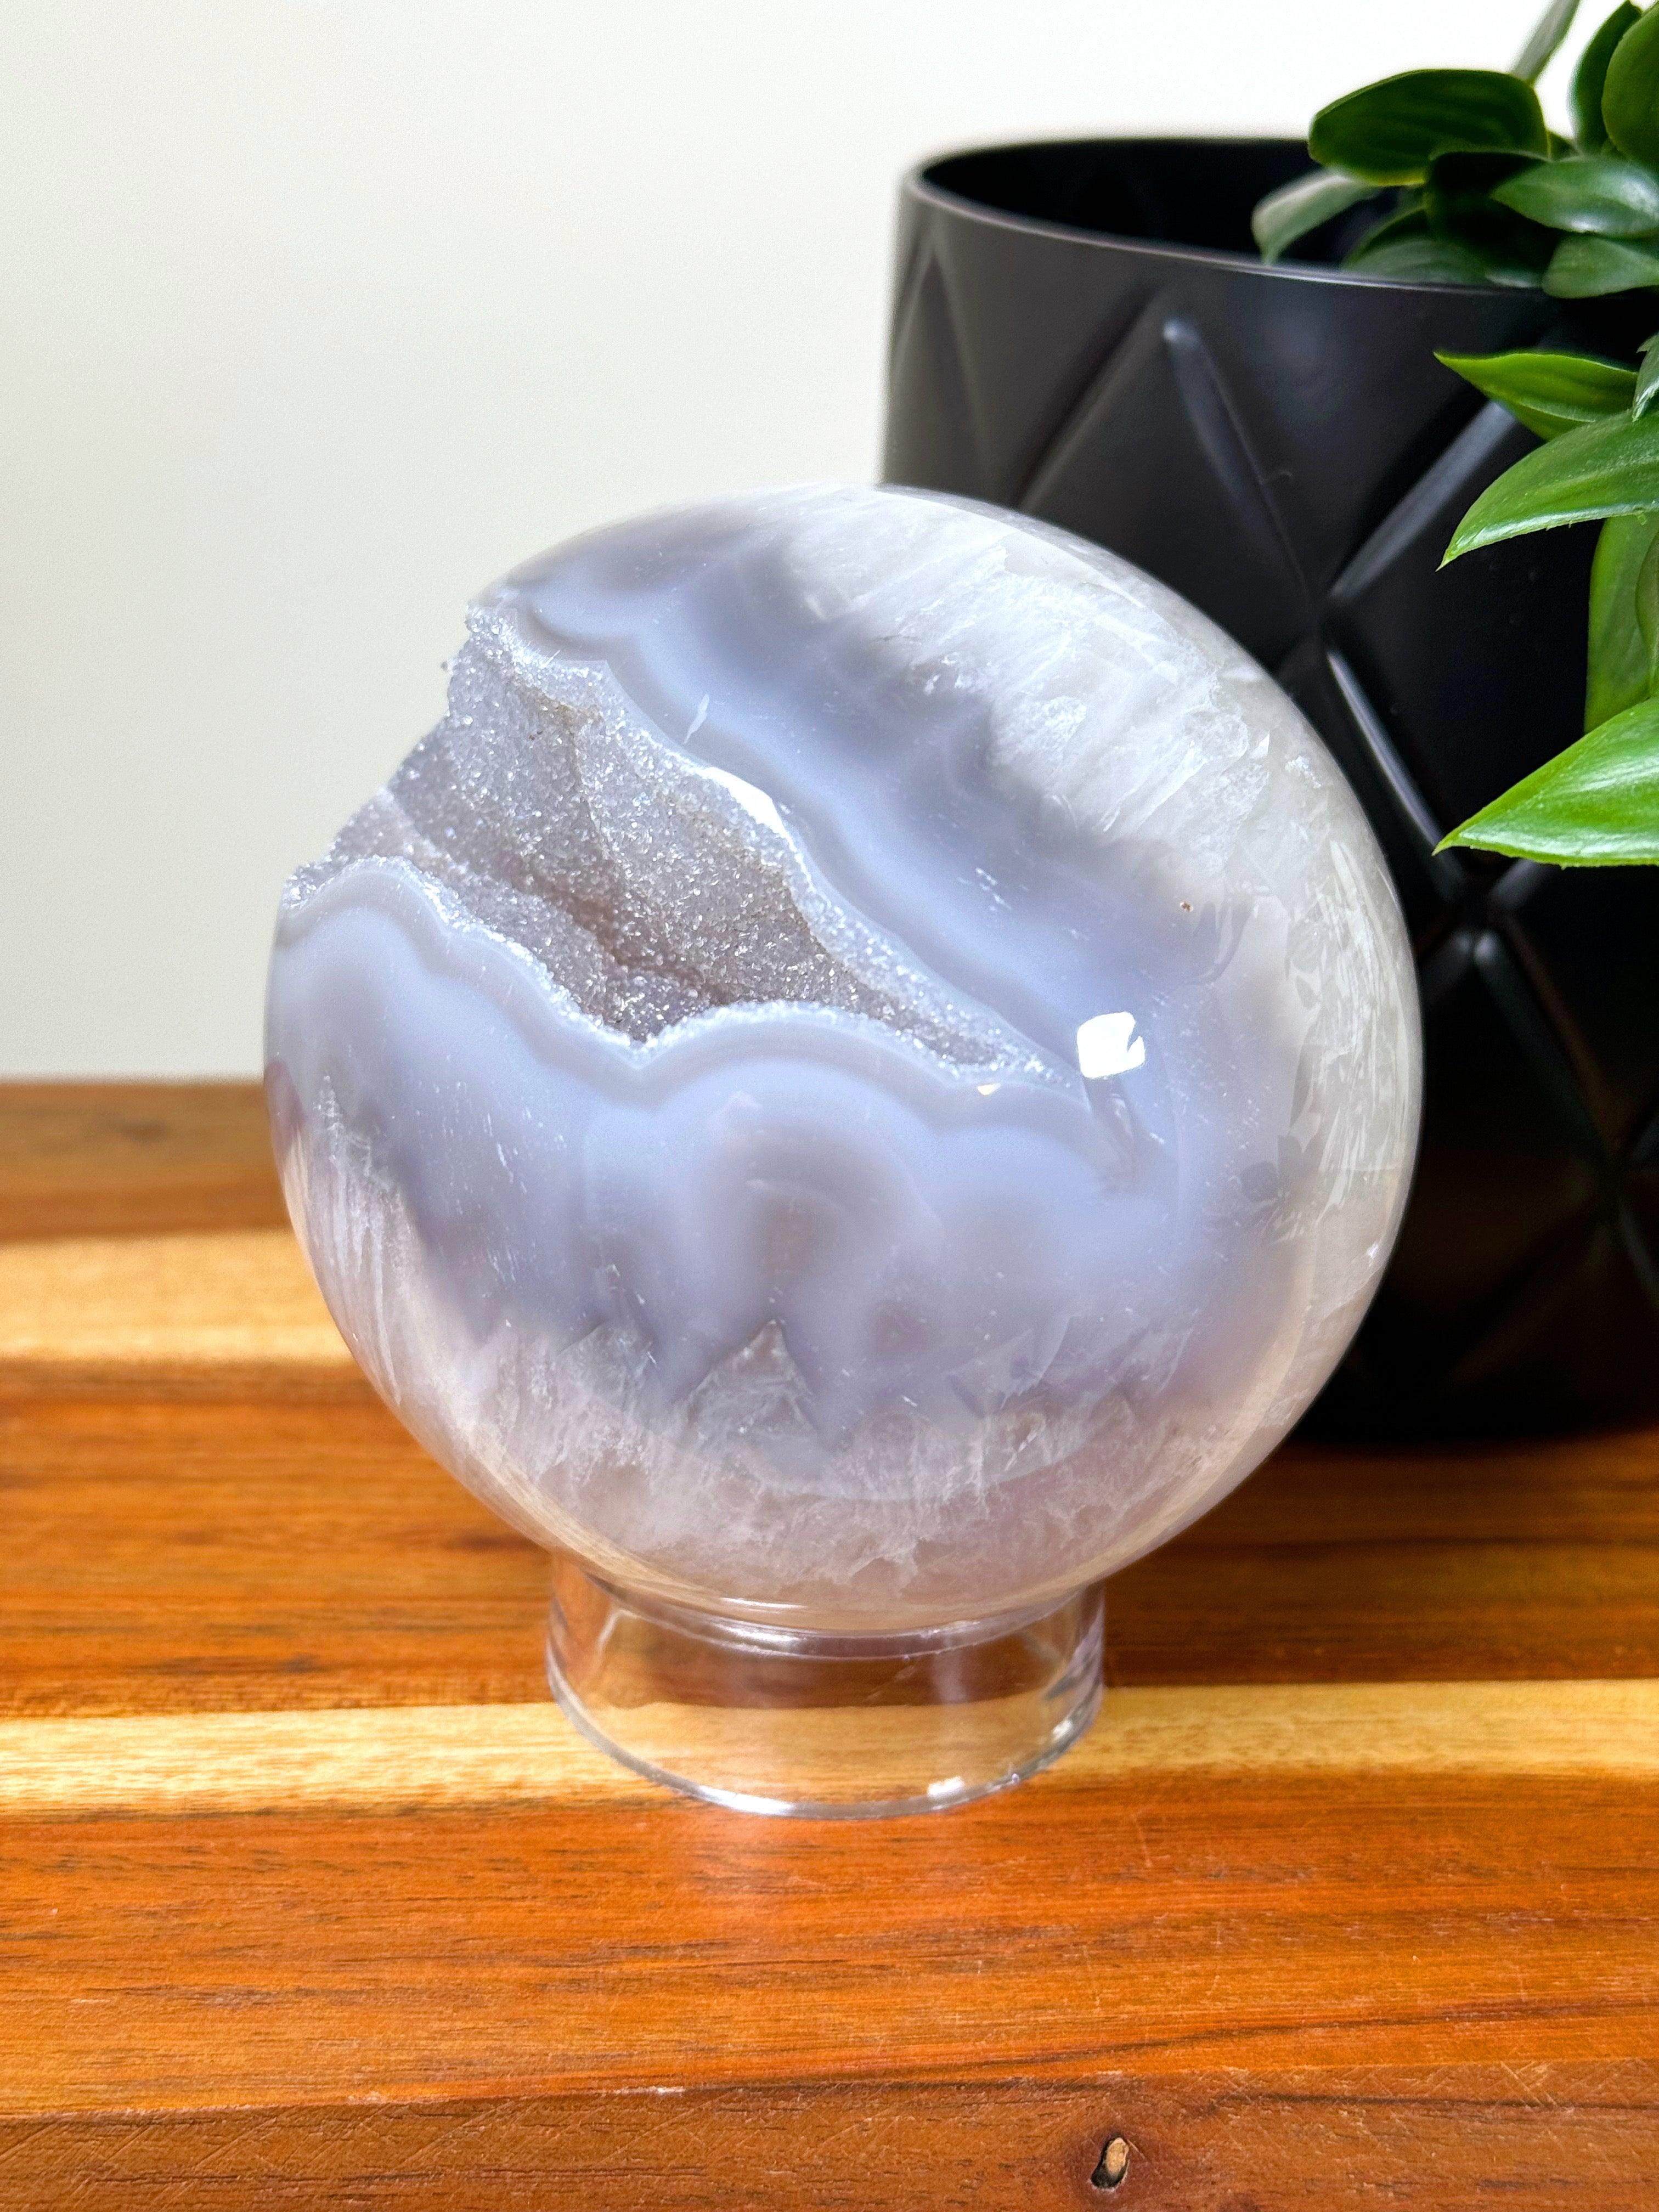 DRUZY AGATE SPHERE 4 - agate, druzy agate, googly agate, googly eye, googly eye agate, one of a kind, sphere, statement piece - The Mineral Maven